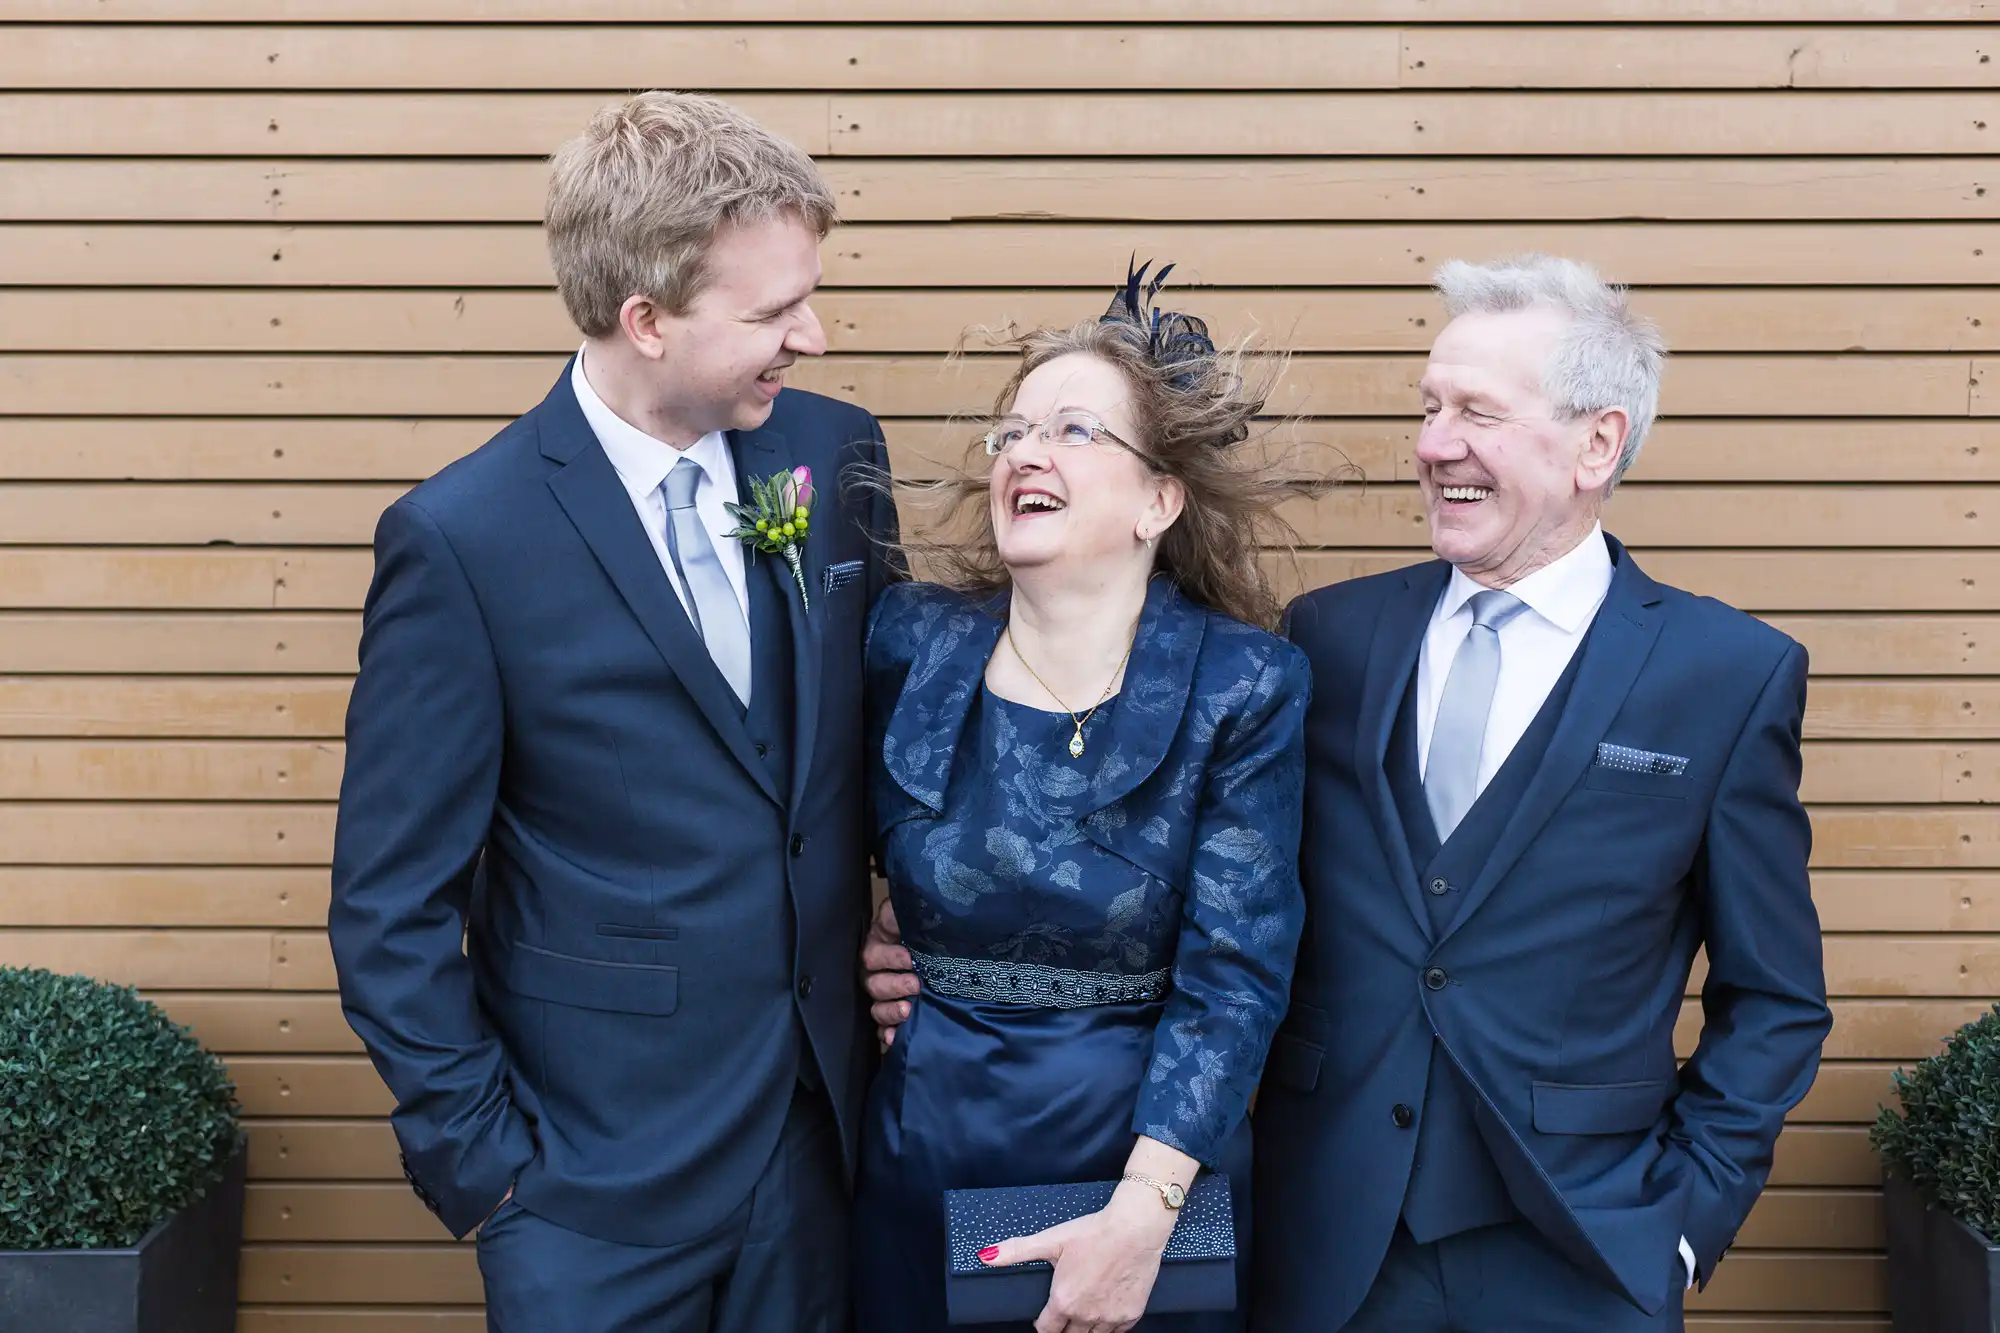 Three people laughing joyously at an event; a younger man in a suit on the left, a middle-aged woman in a blue dress and fascinator in the middle, and an older man in a suit on the right.